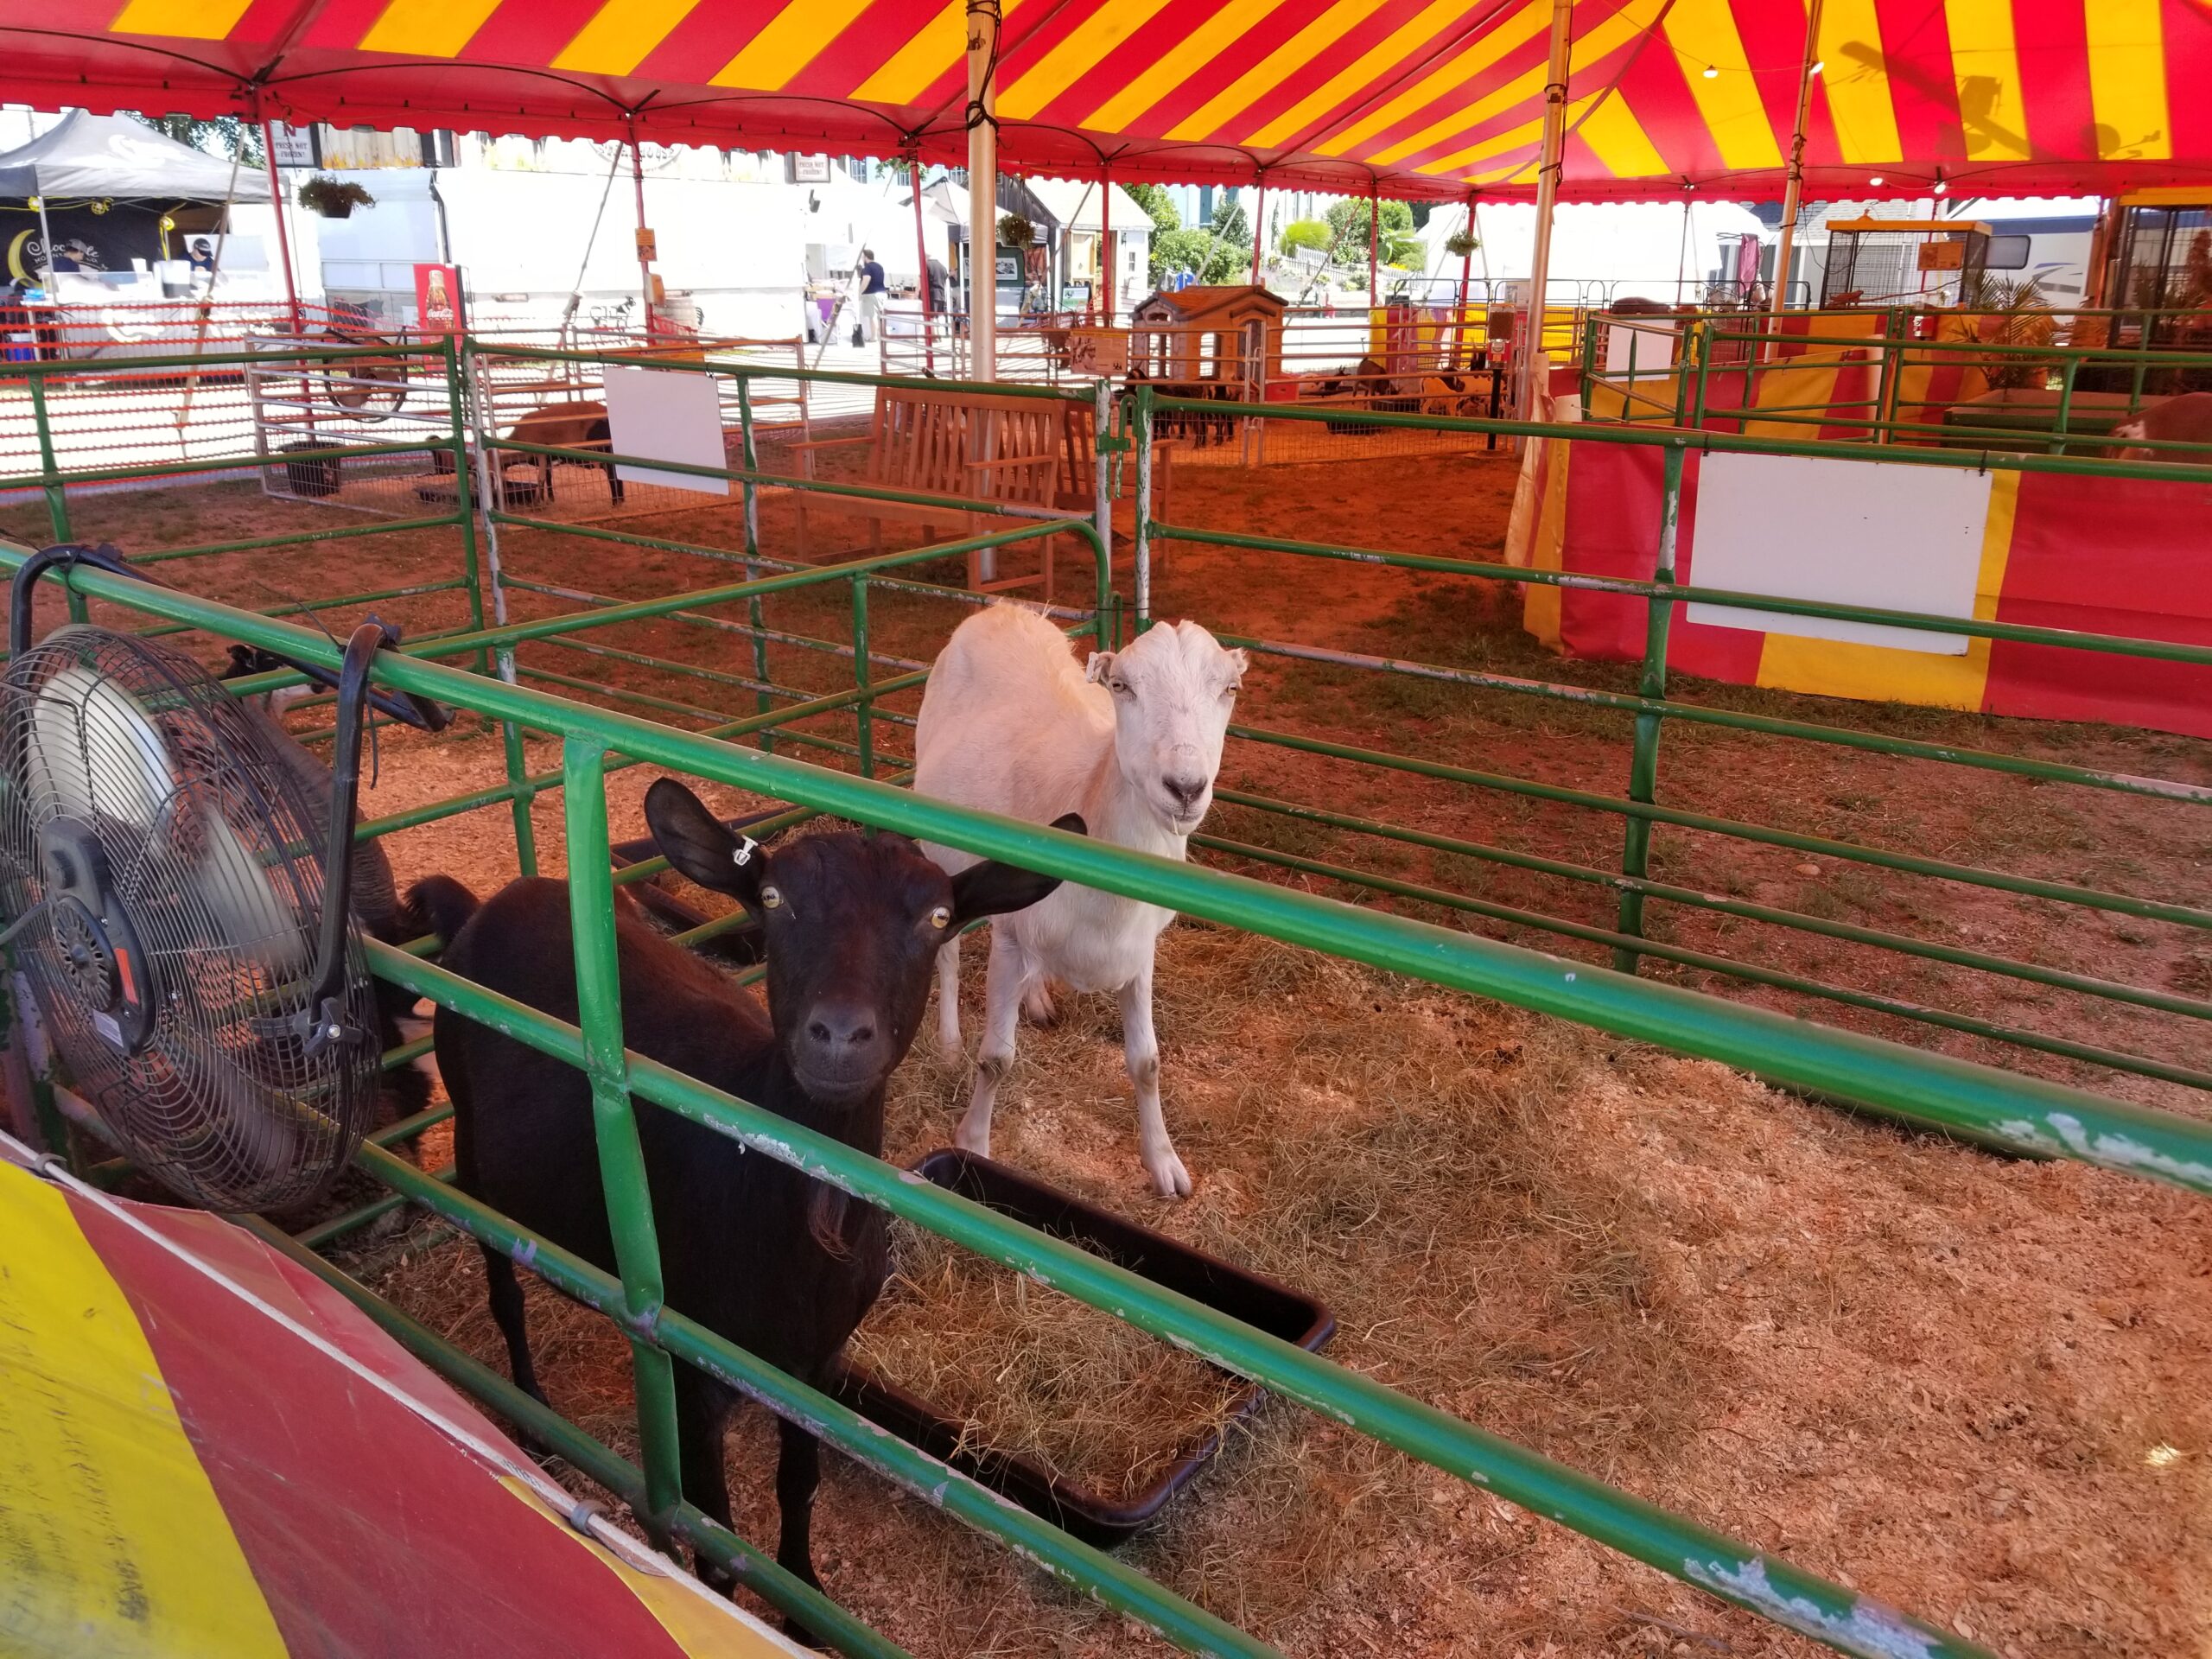 Sights and Sounds from Opening Day of the 154th Marshfield Fair WATD